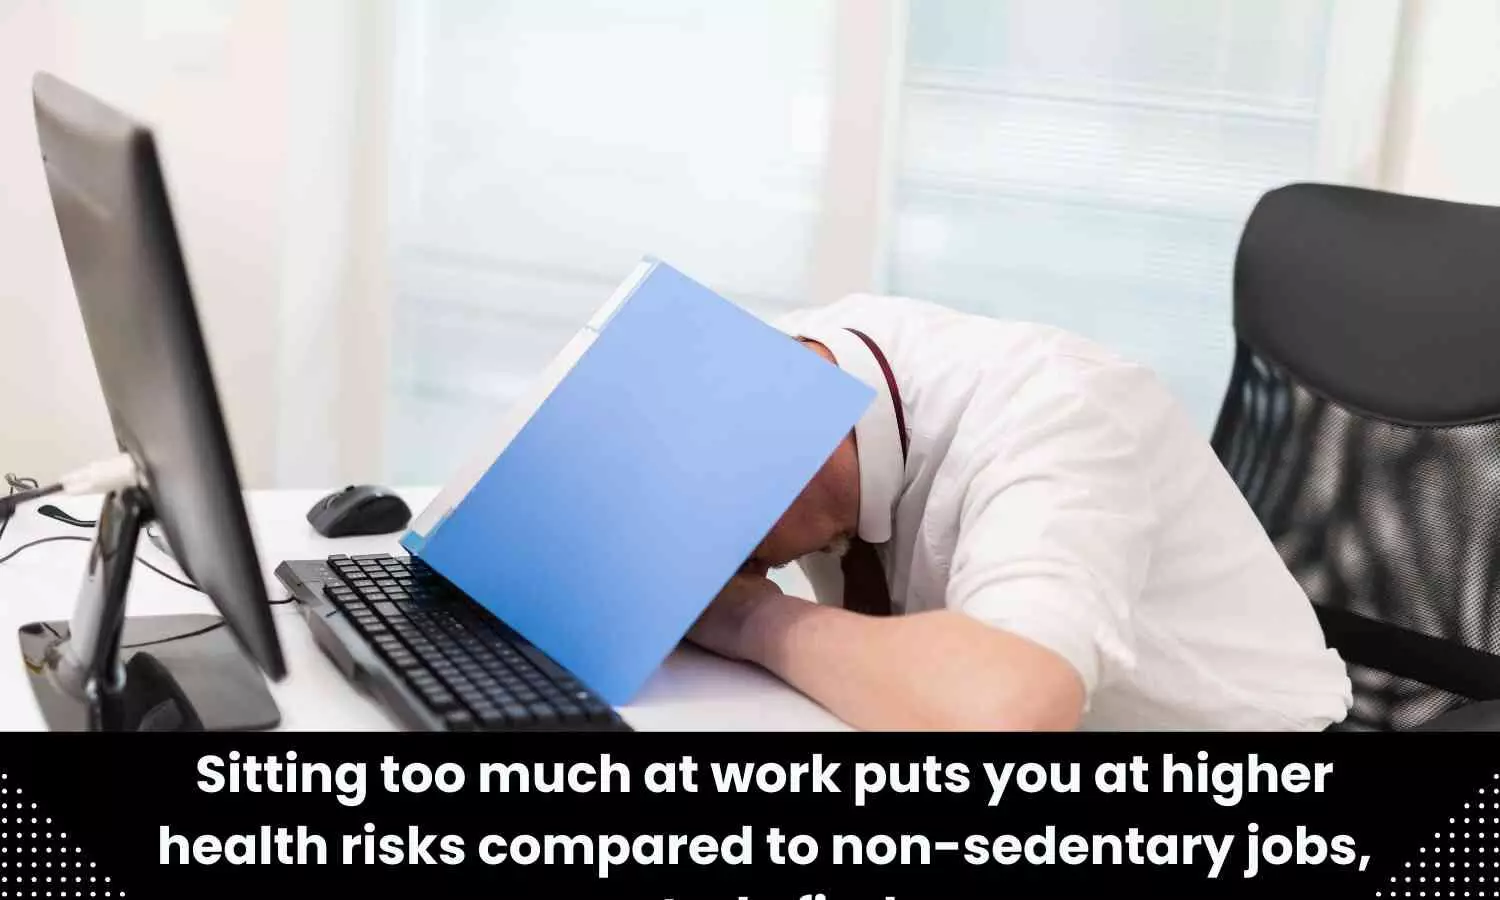 Study finds prolonged sitting at work linked to higher health risks compared to non-sedentary jobs